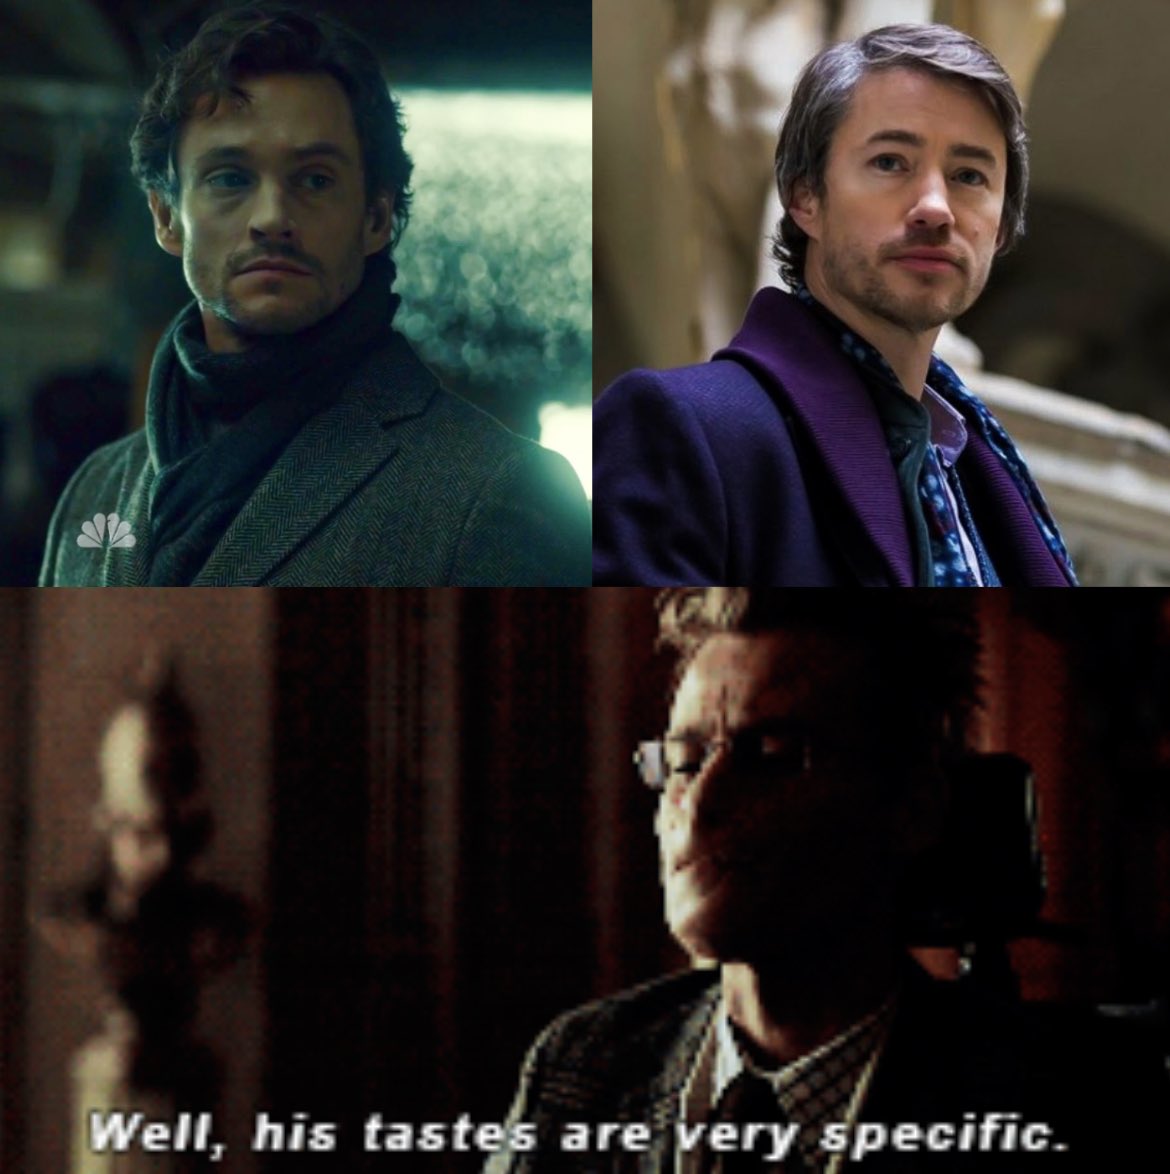 Posting #hannibal related memes until they #savehannibal, day 679.
I see a pattern.